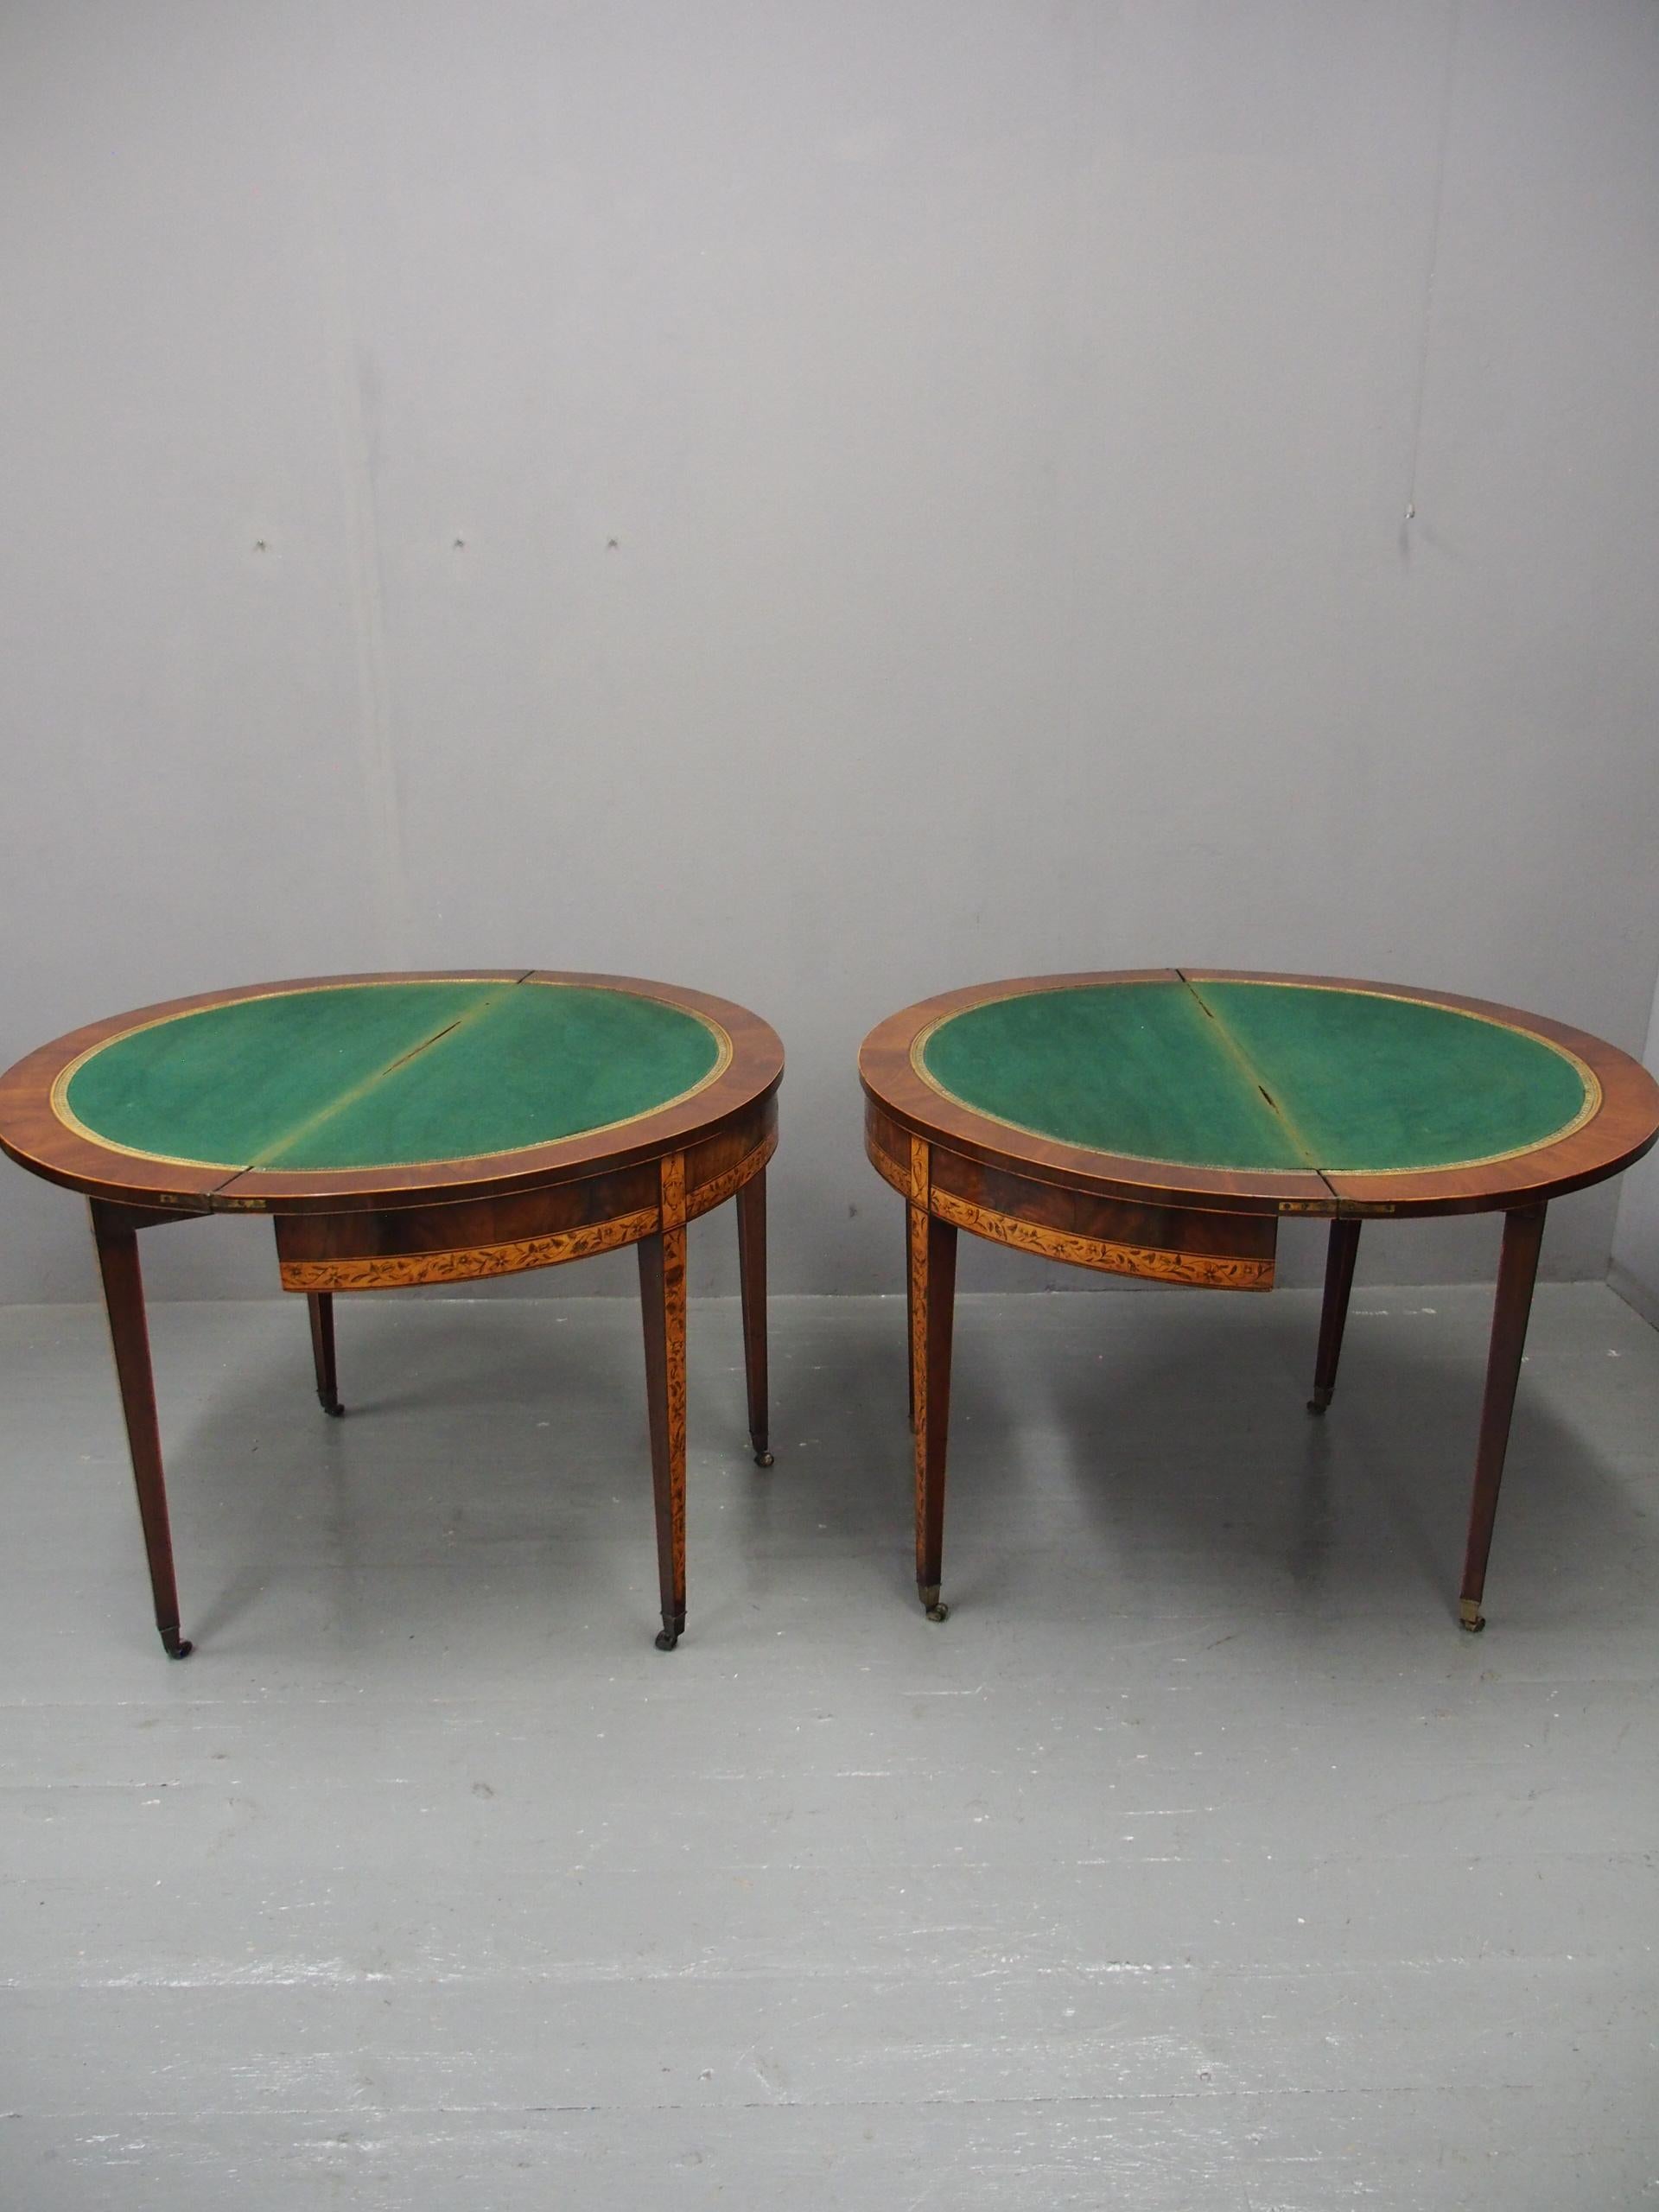 Pair of George III Mahogany Inlaid and Penwork Games Tables In Good Condition For Sale In Edinburgh, GB